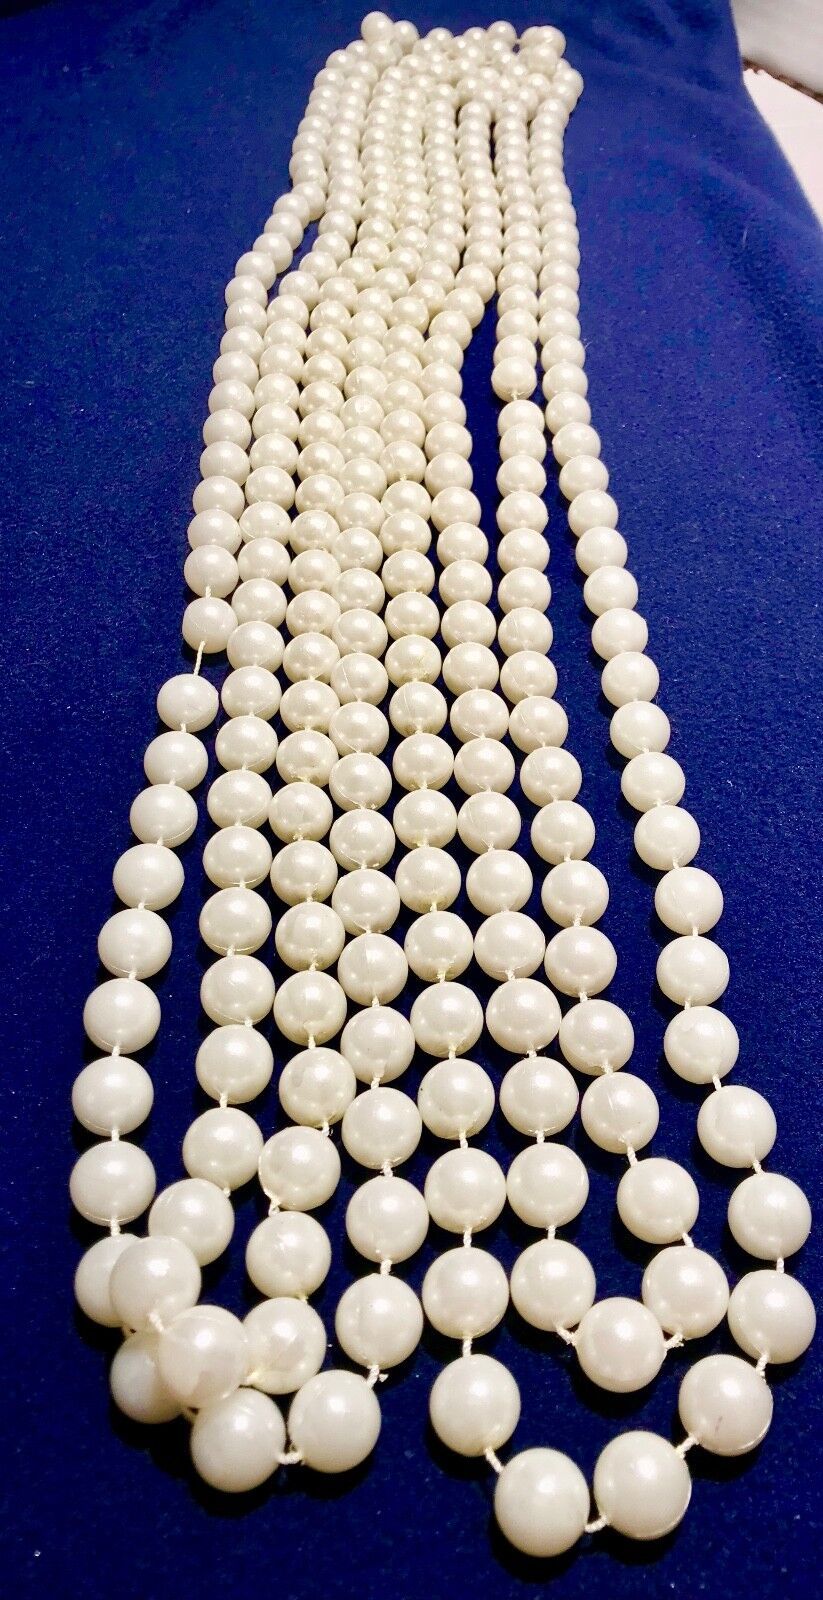 Primary image for Mardi Gras Bead Very Long Necklaces Lot of 3 Pearl & Purple 48 Inch New Orleans